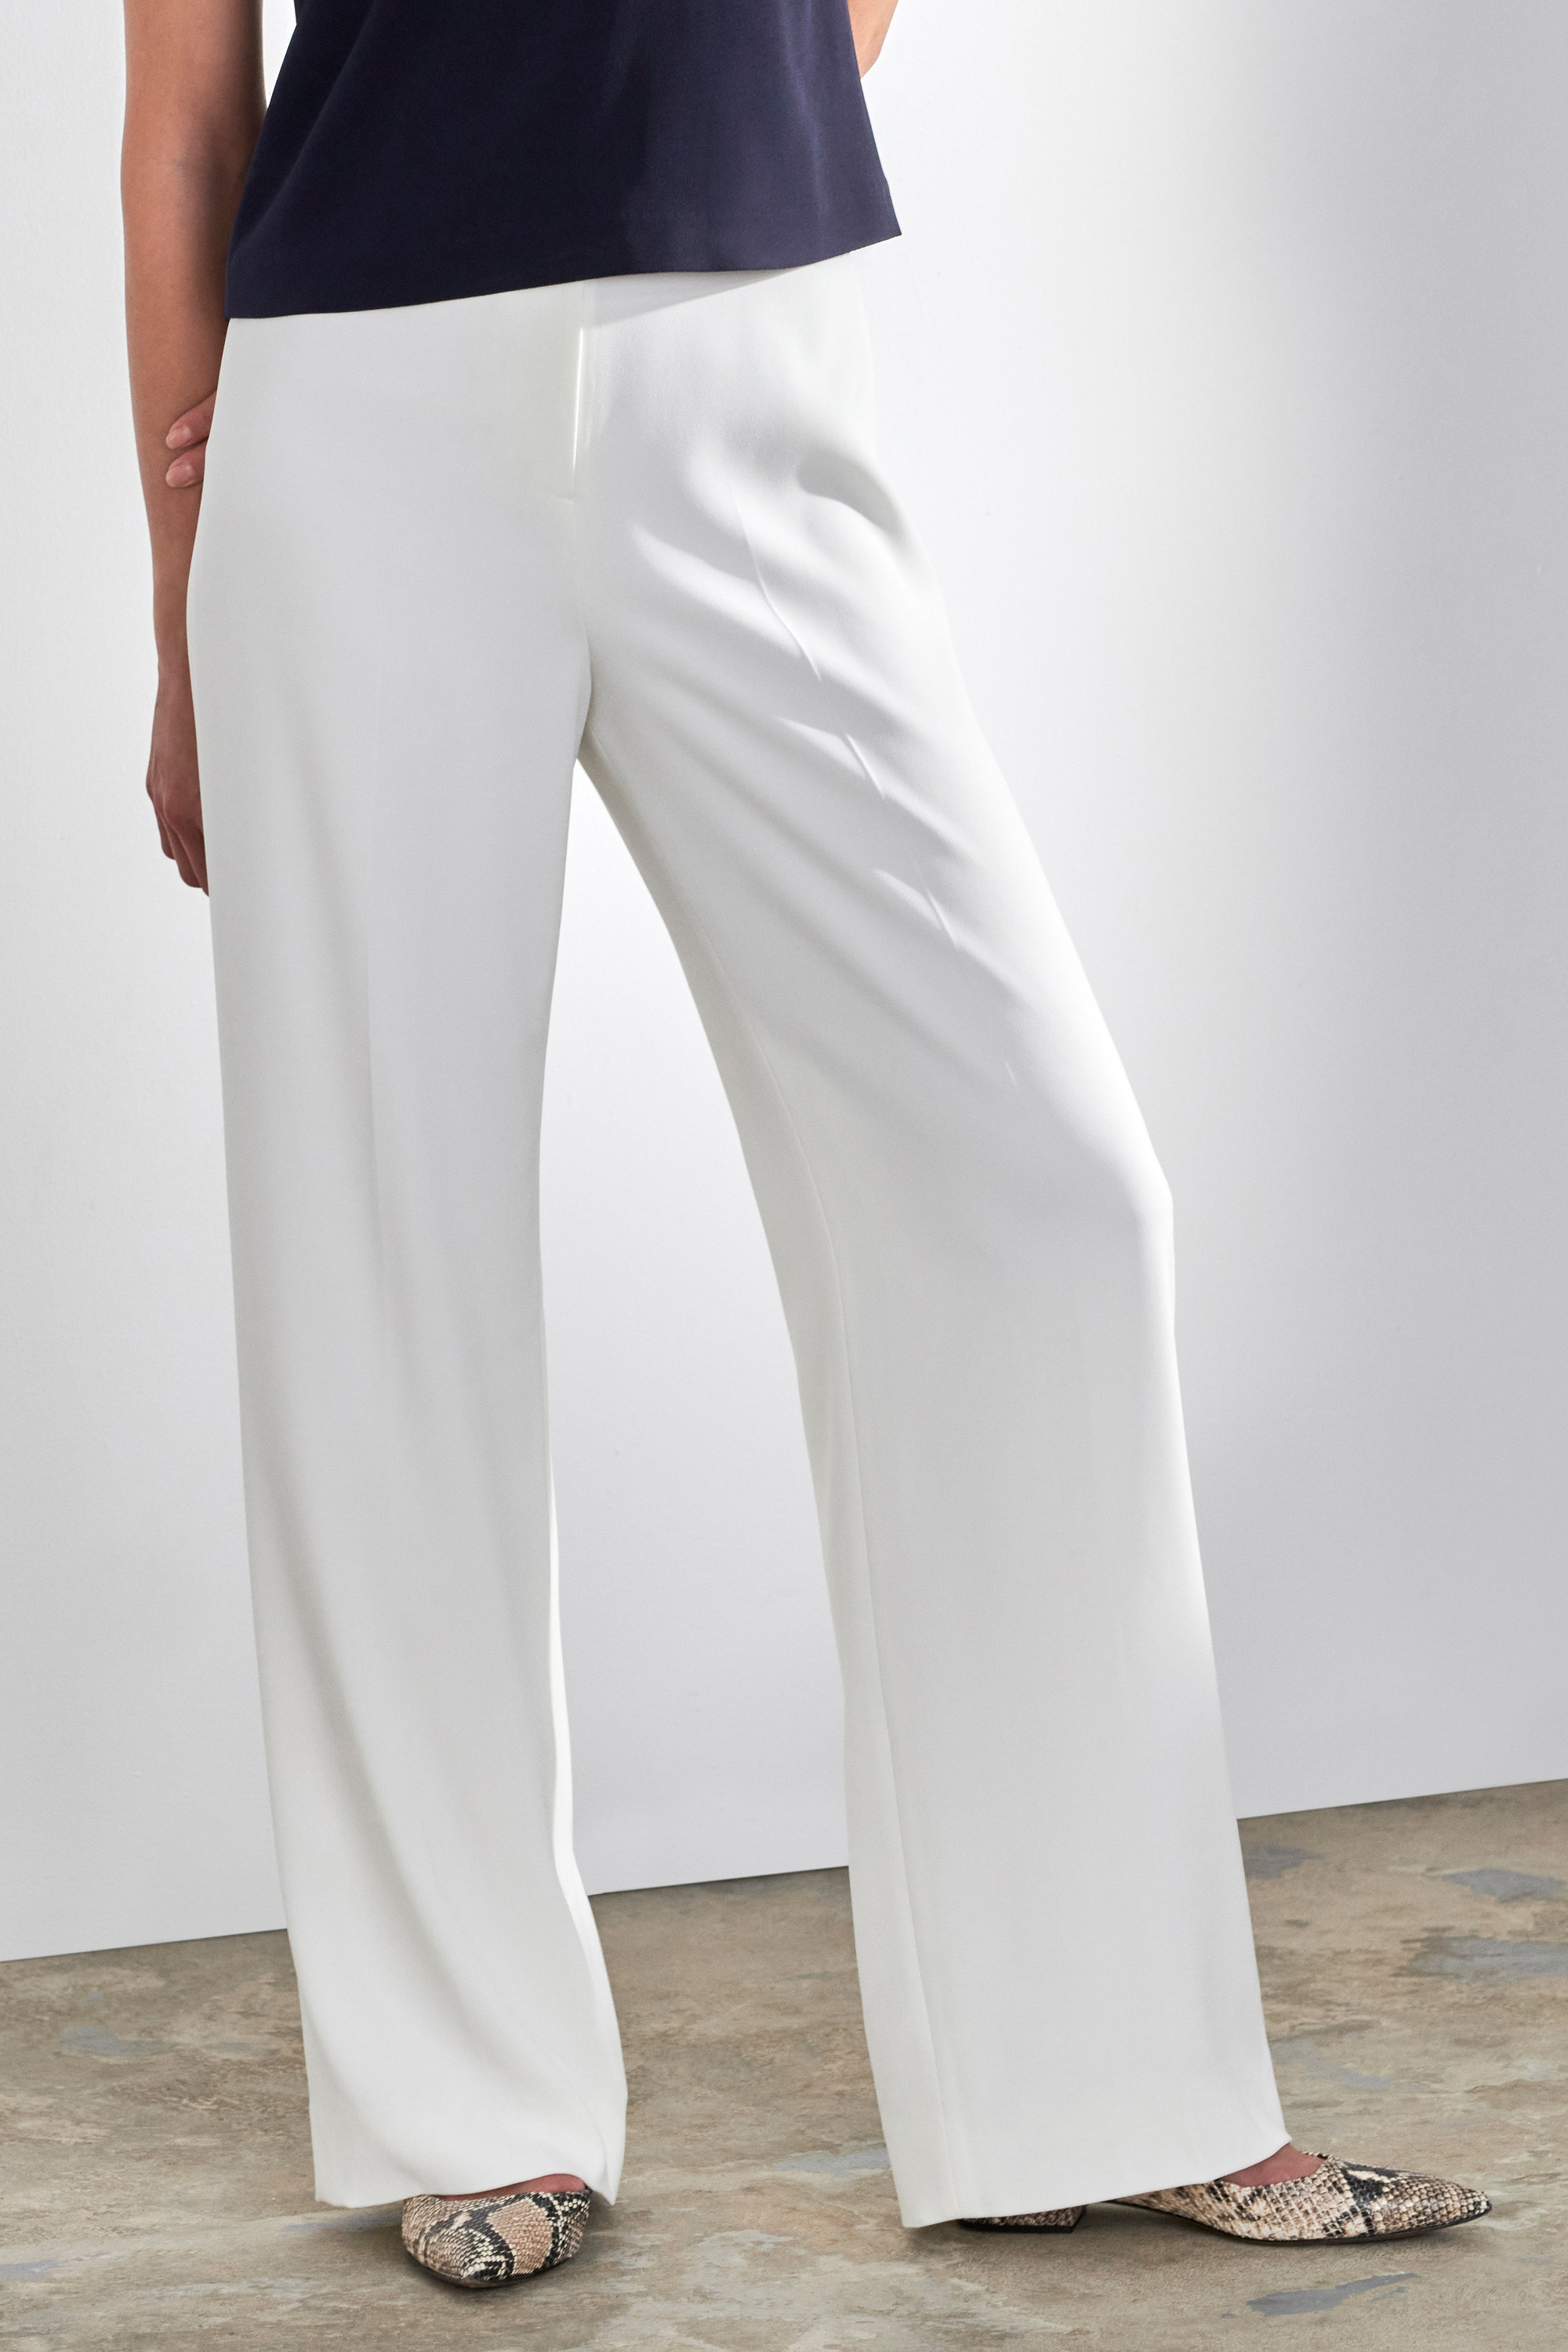 https://cdn11.bigcommerce.com/s-vspt61dziw/images/stencil/3000x3000/products/275/12925/TheFold_Clever_Crepe_High-Waisted_Elasticated_Trousers_Ivory_DT165_2402_1_v2__03128.1706800043.jpg?c=1